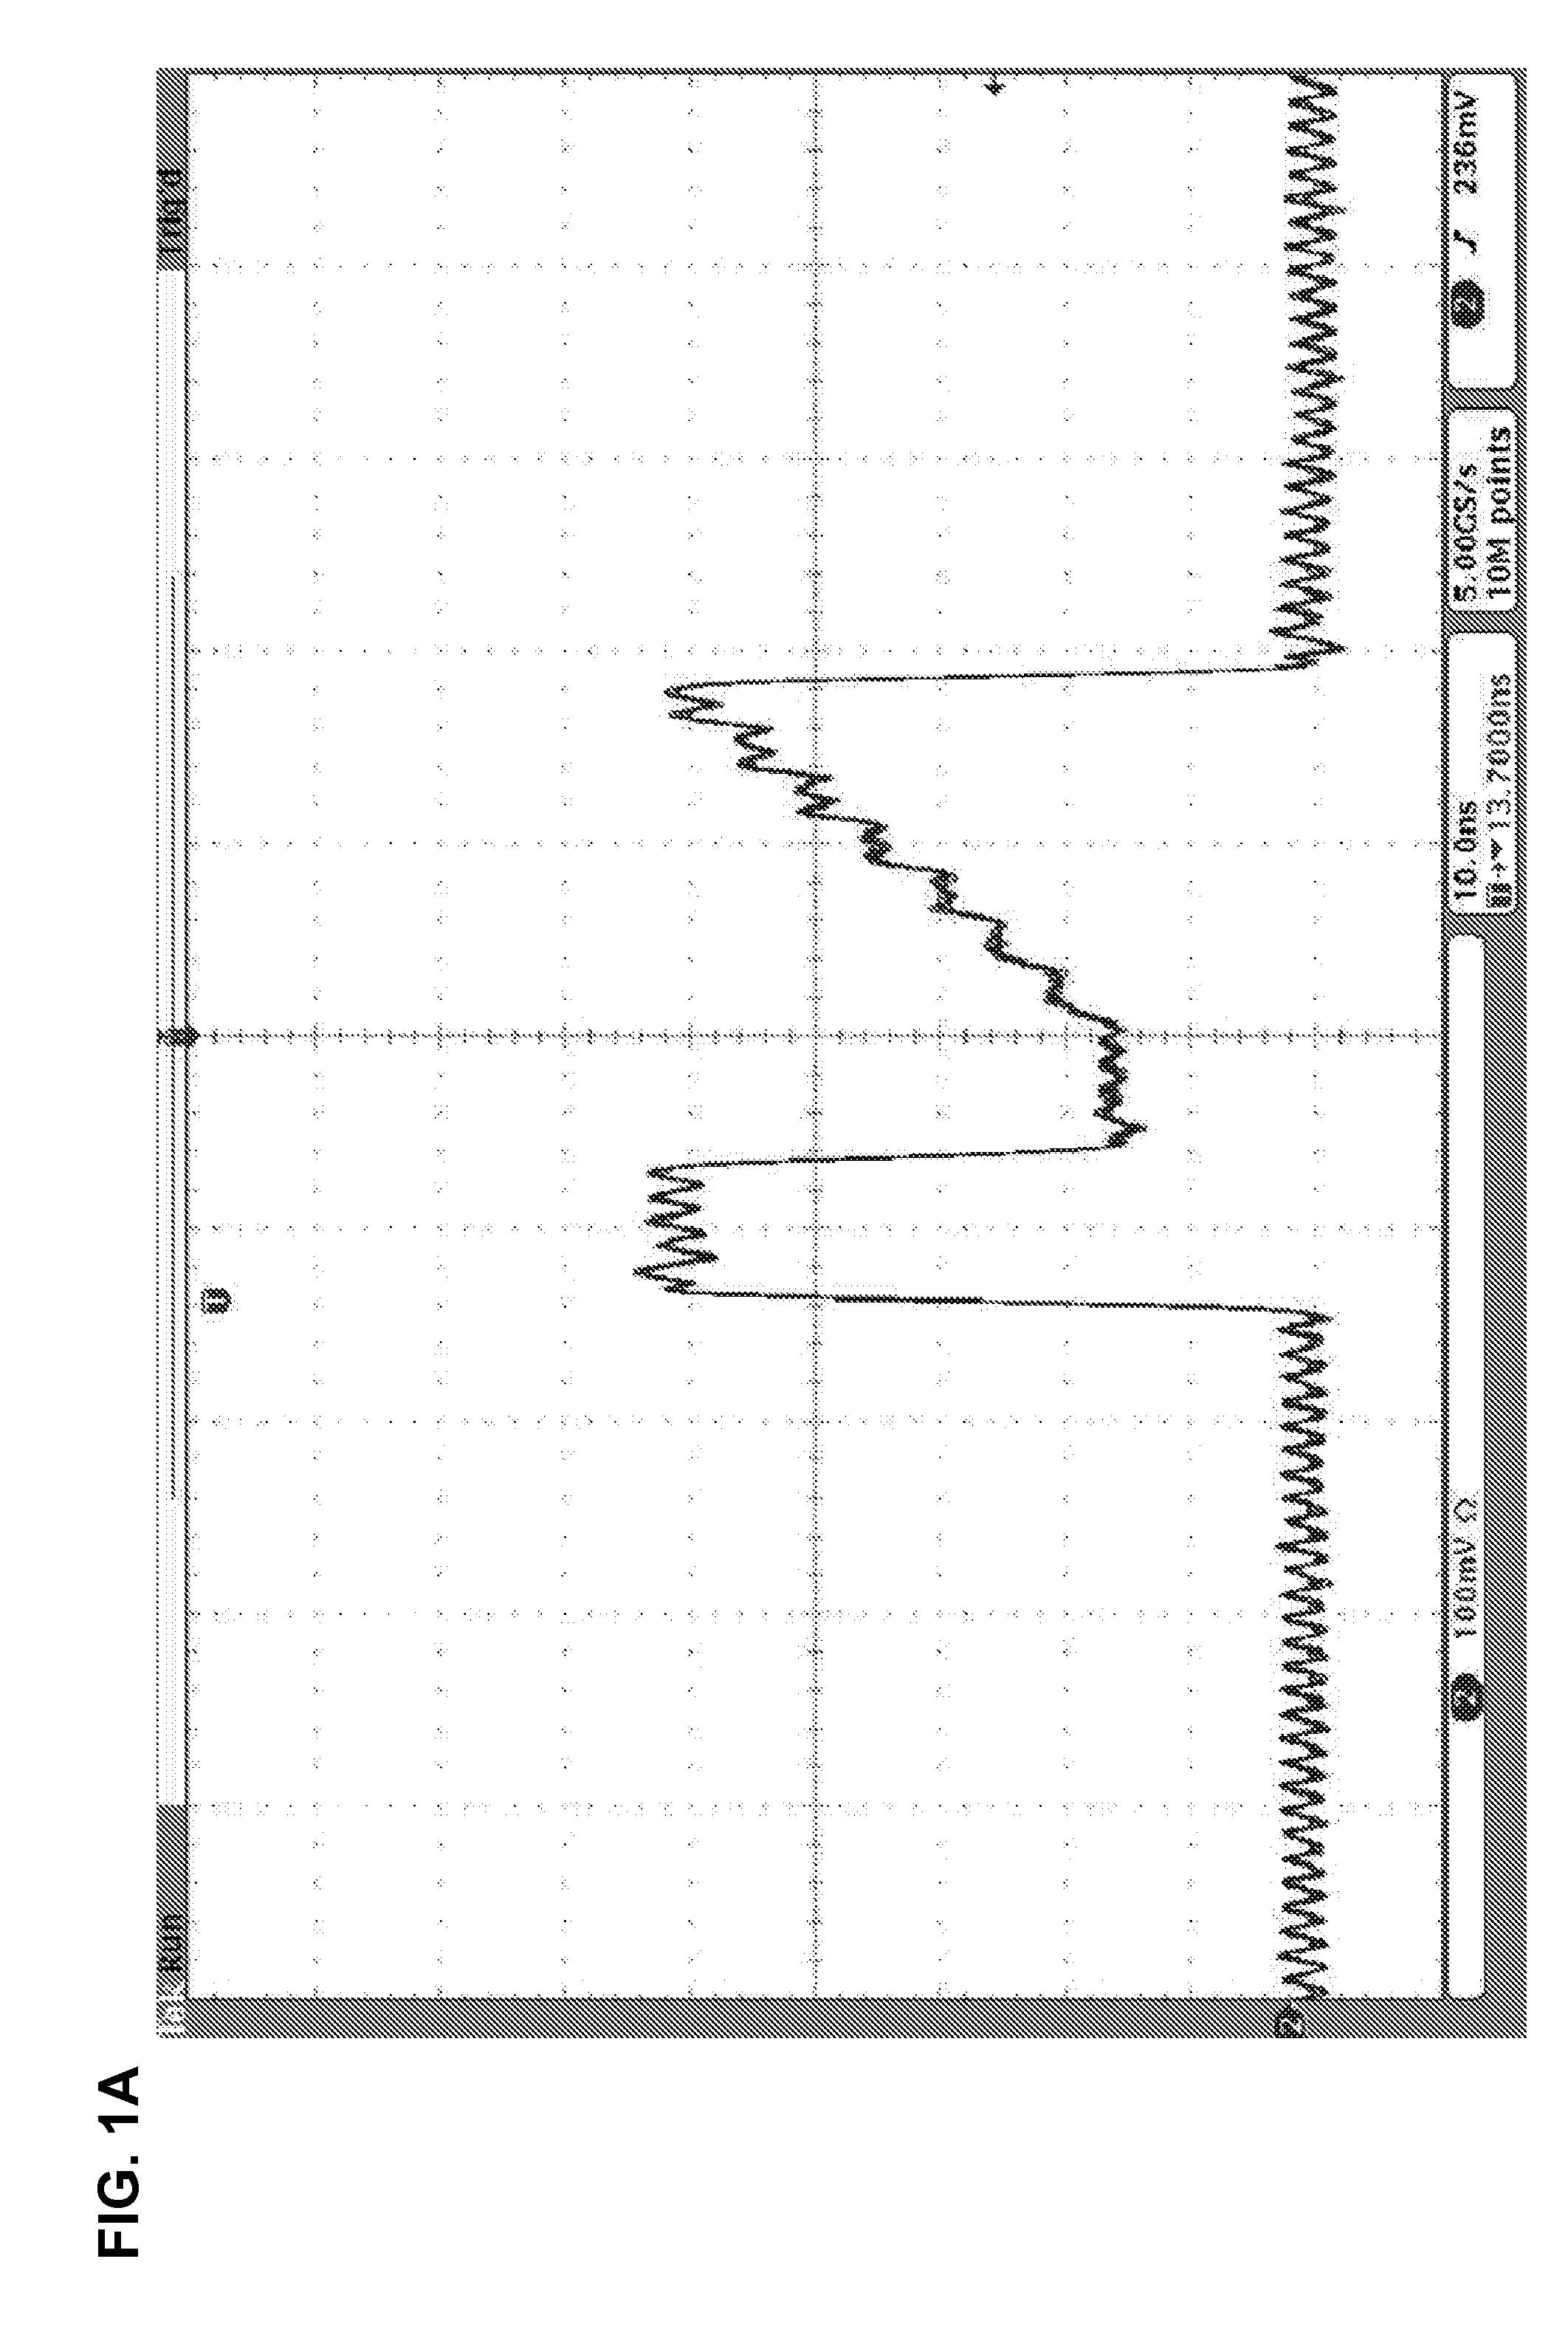 Driver circuit for the direct modulation of a laser diode